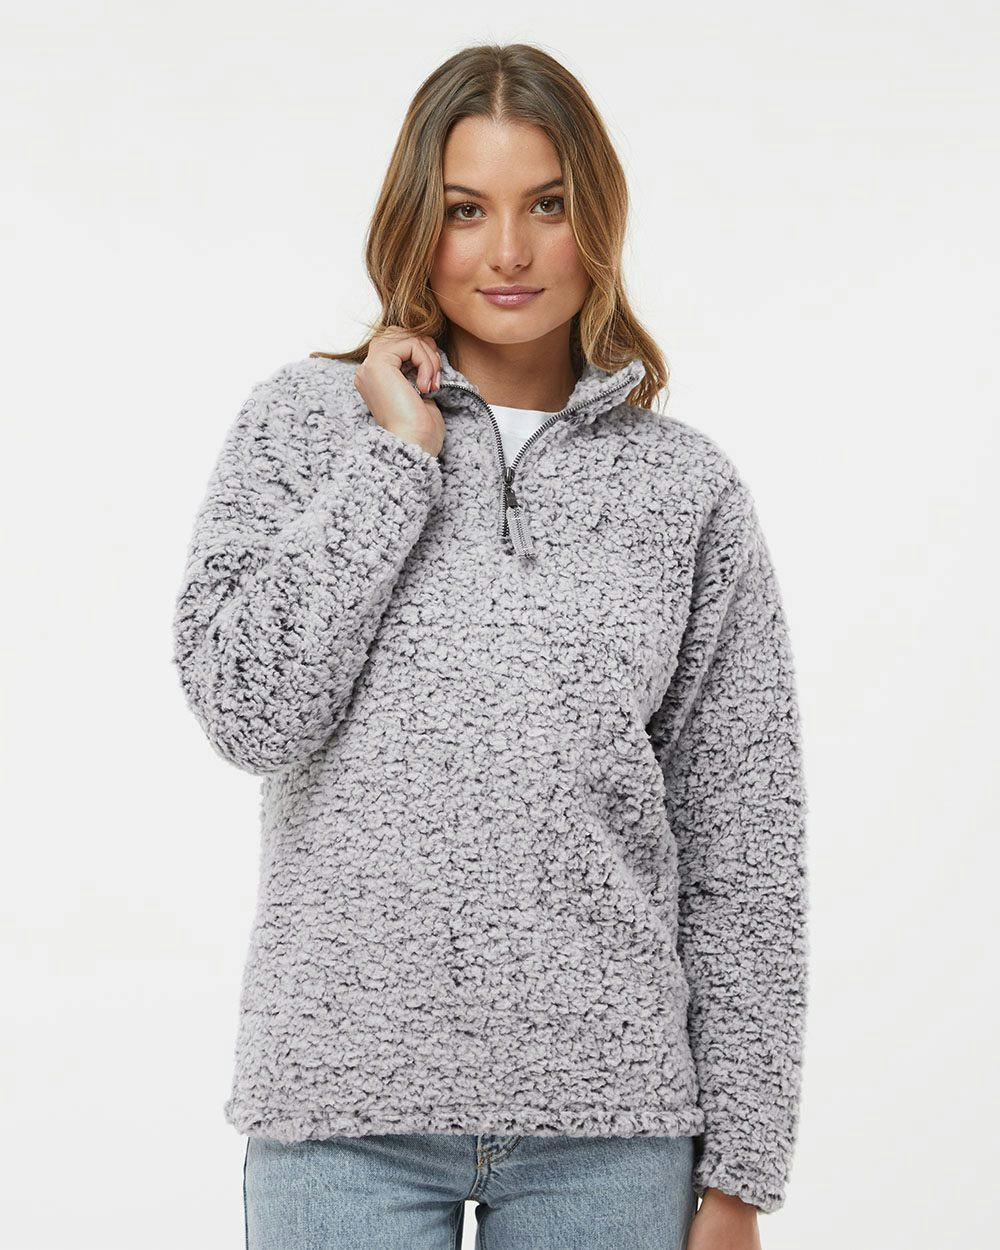 Image for Women’s Epic Sherpa Quarter-Zip Pullover - 8451